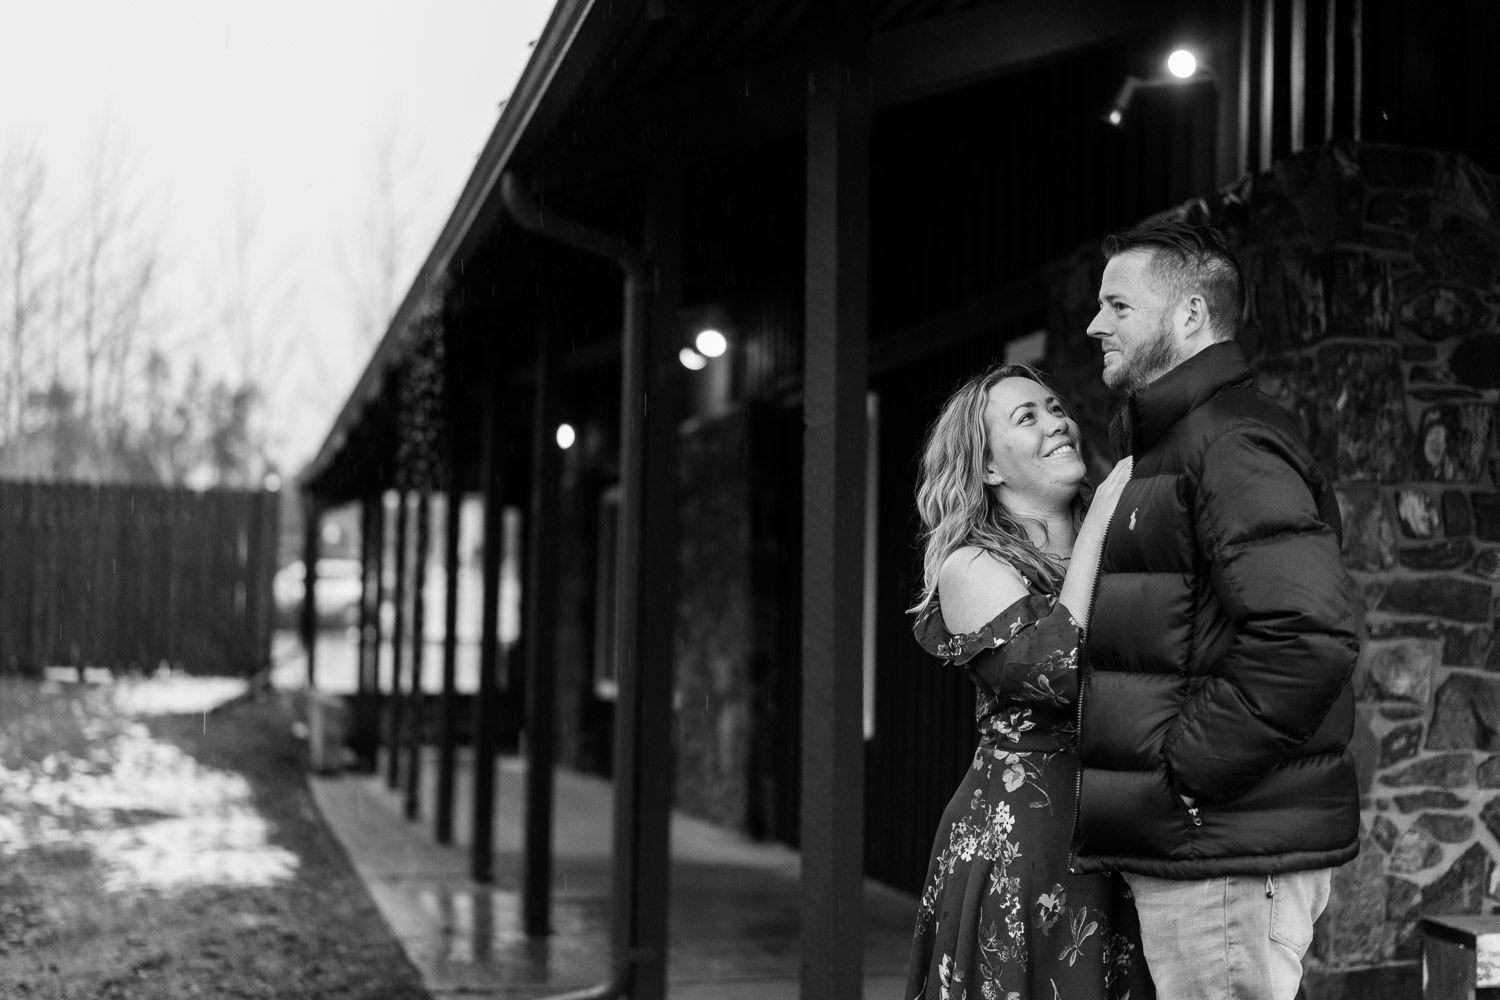 Winter Keystone Engagement Photos at a brewery